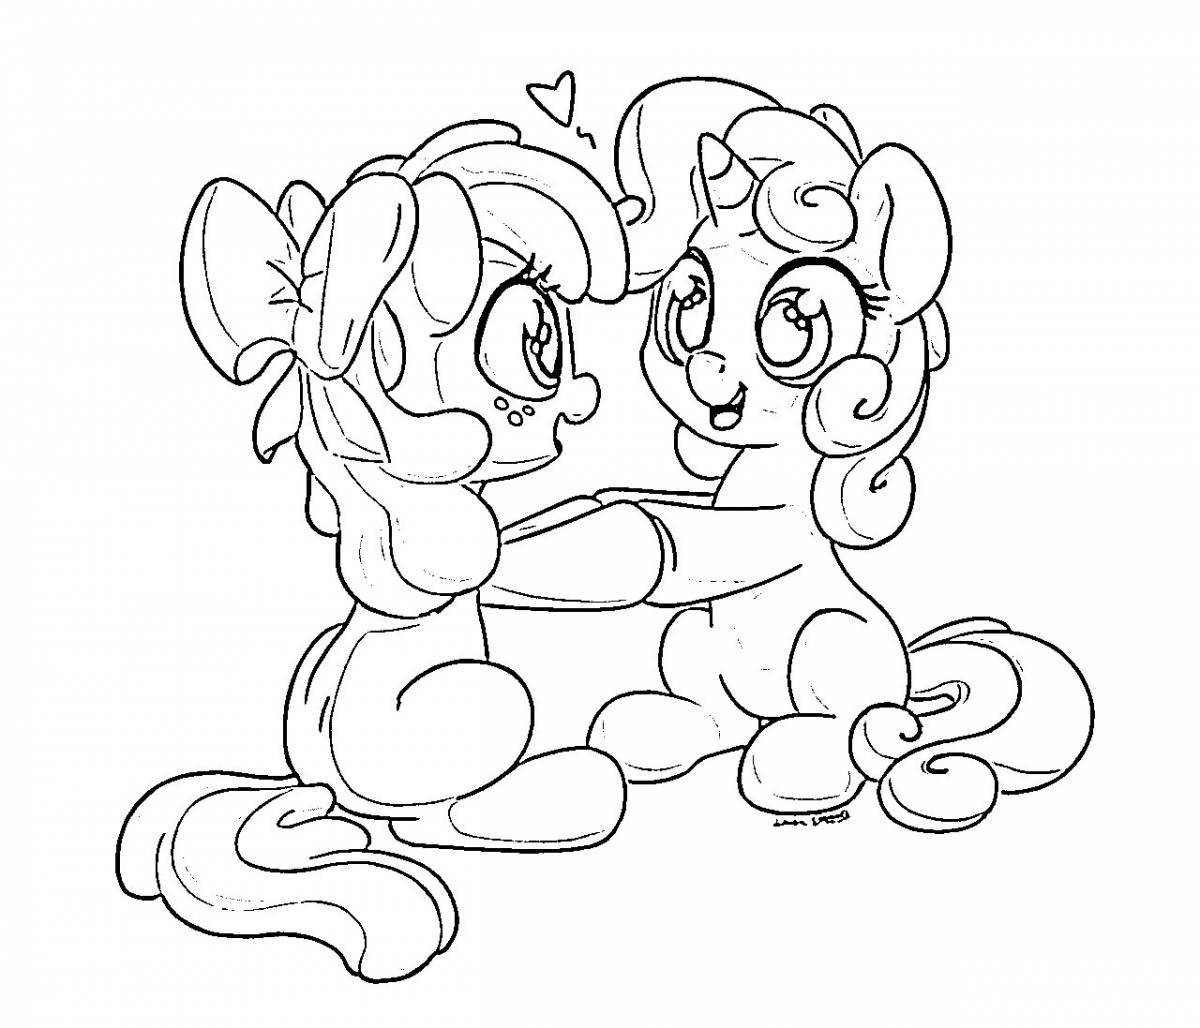 Colorful pony time coloring page